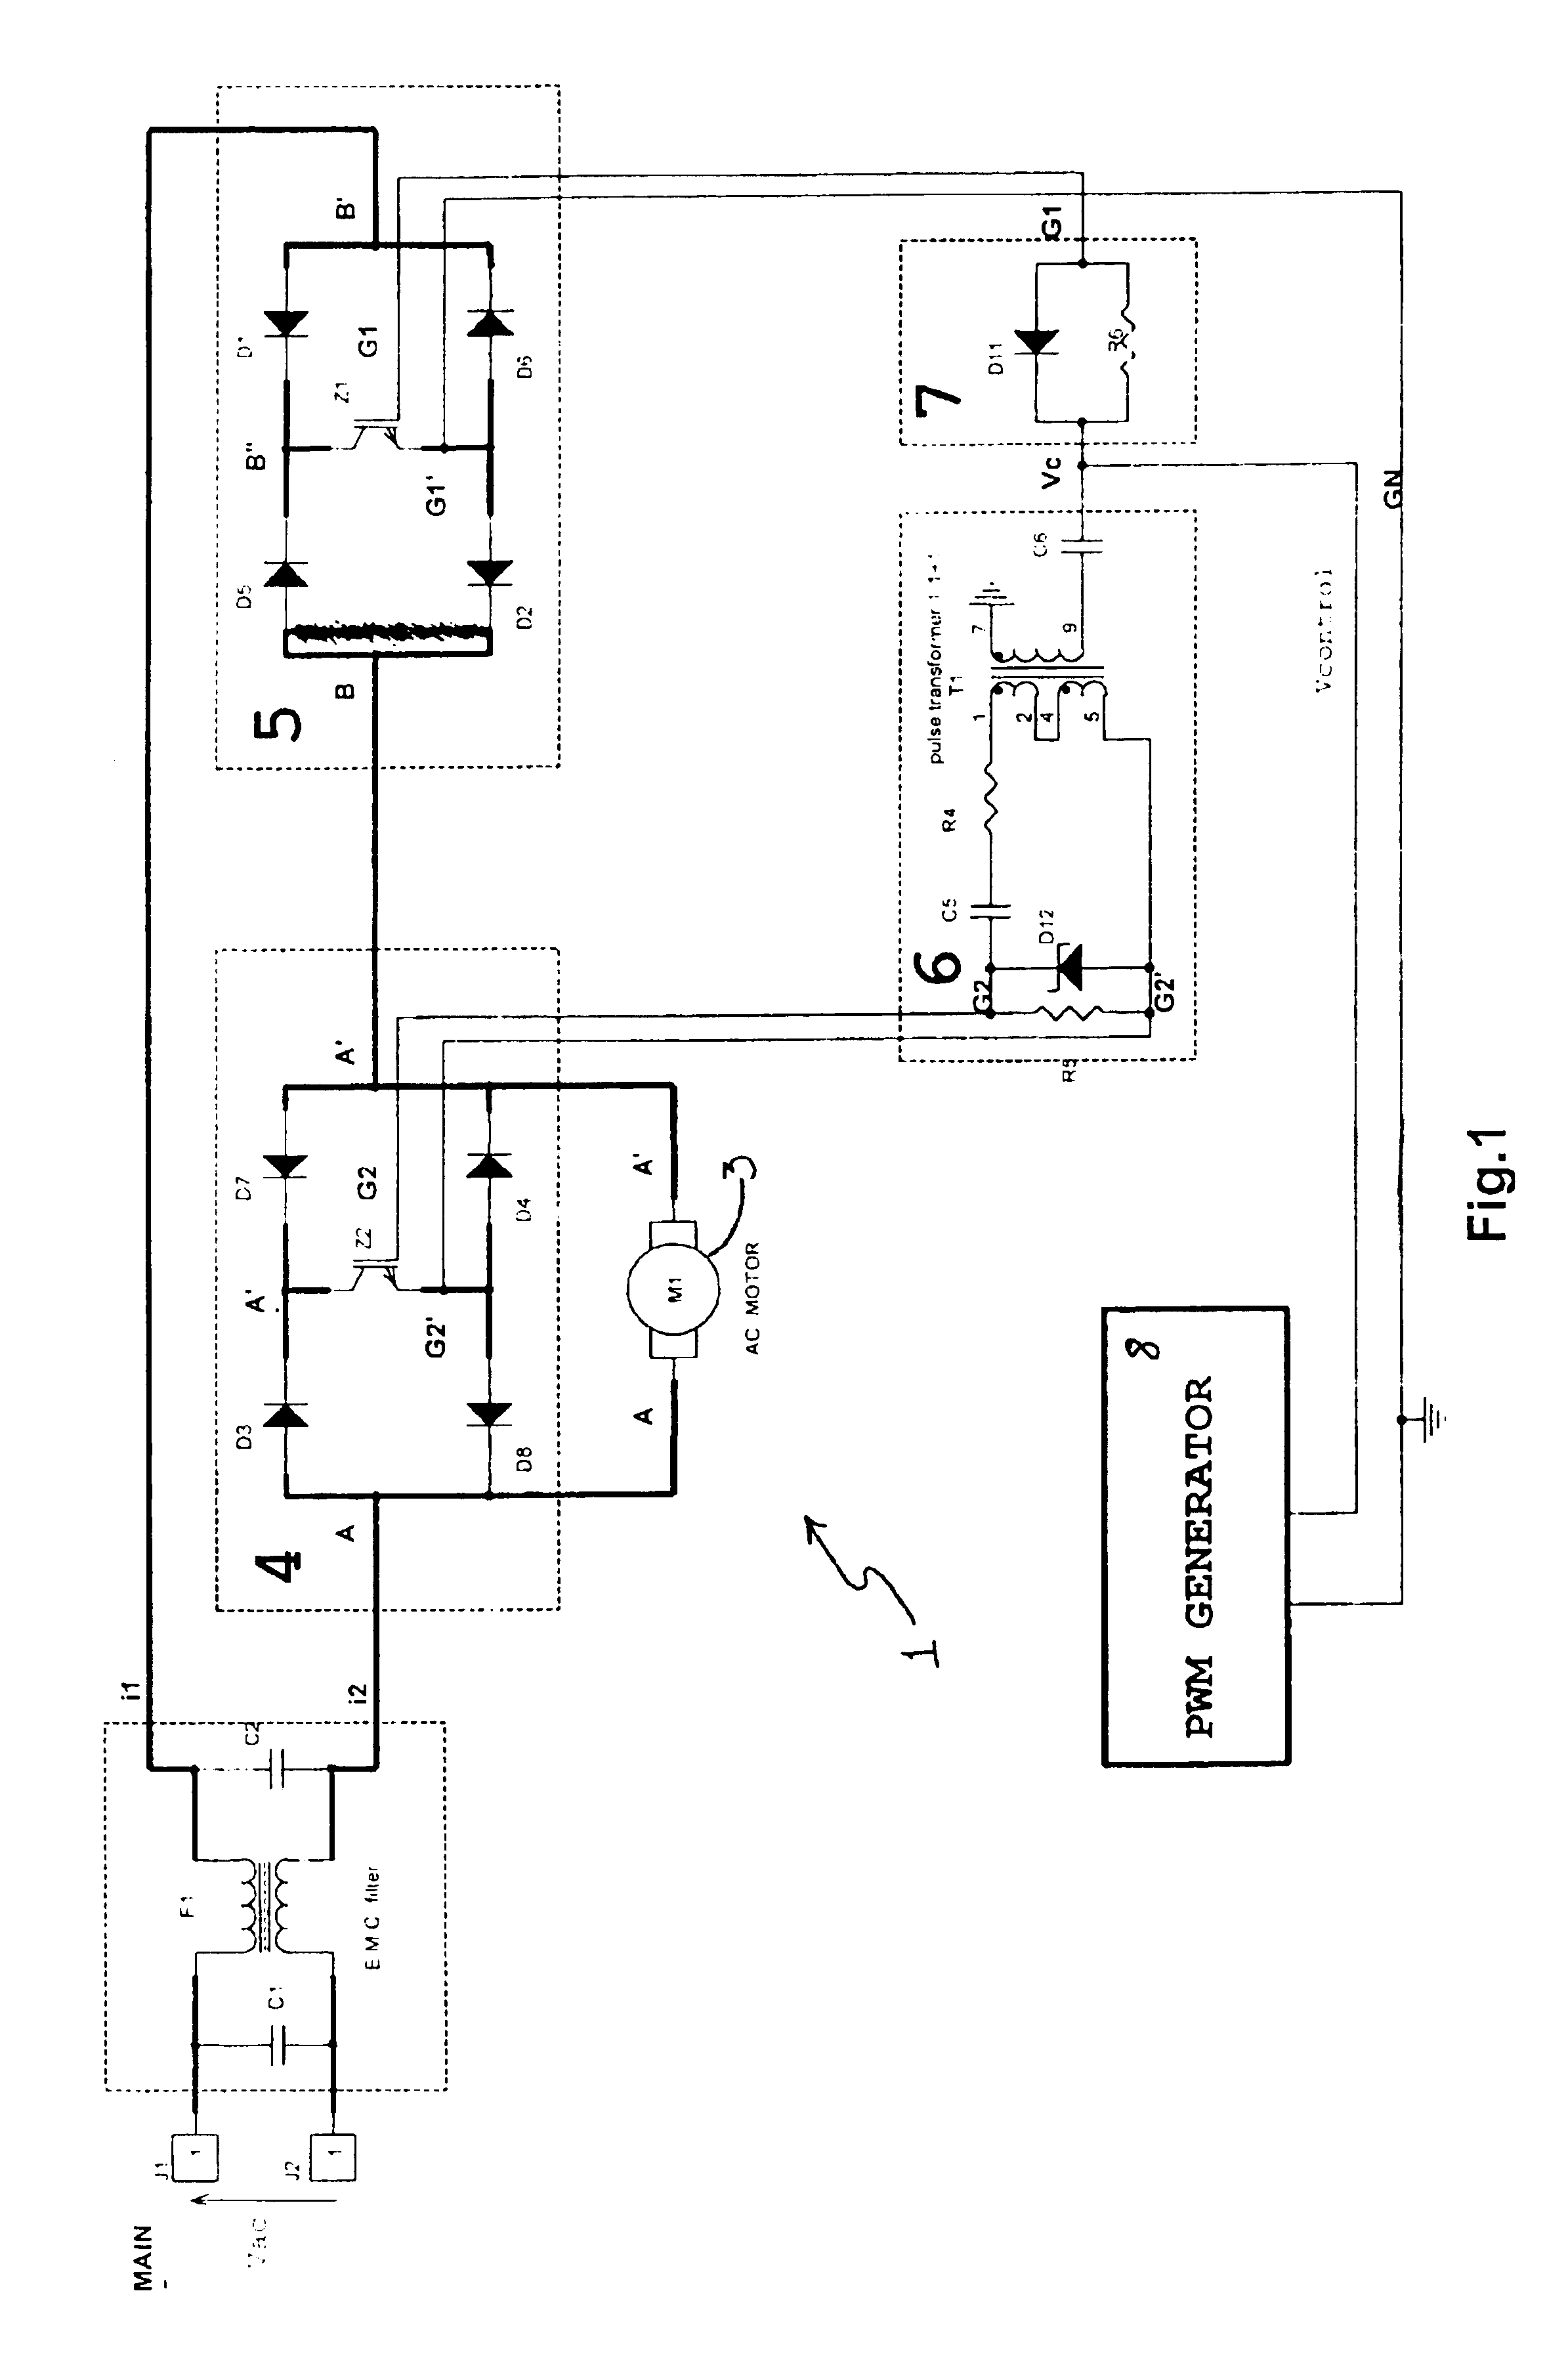 Circuit device for driving an AC electric load